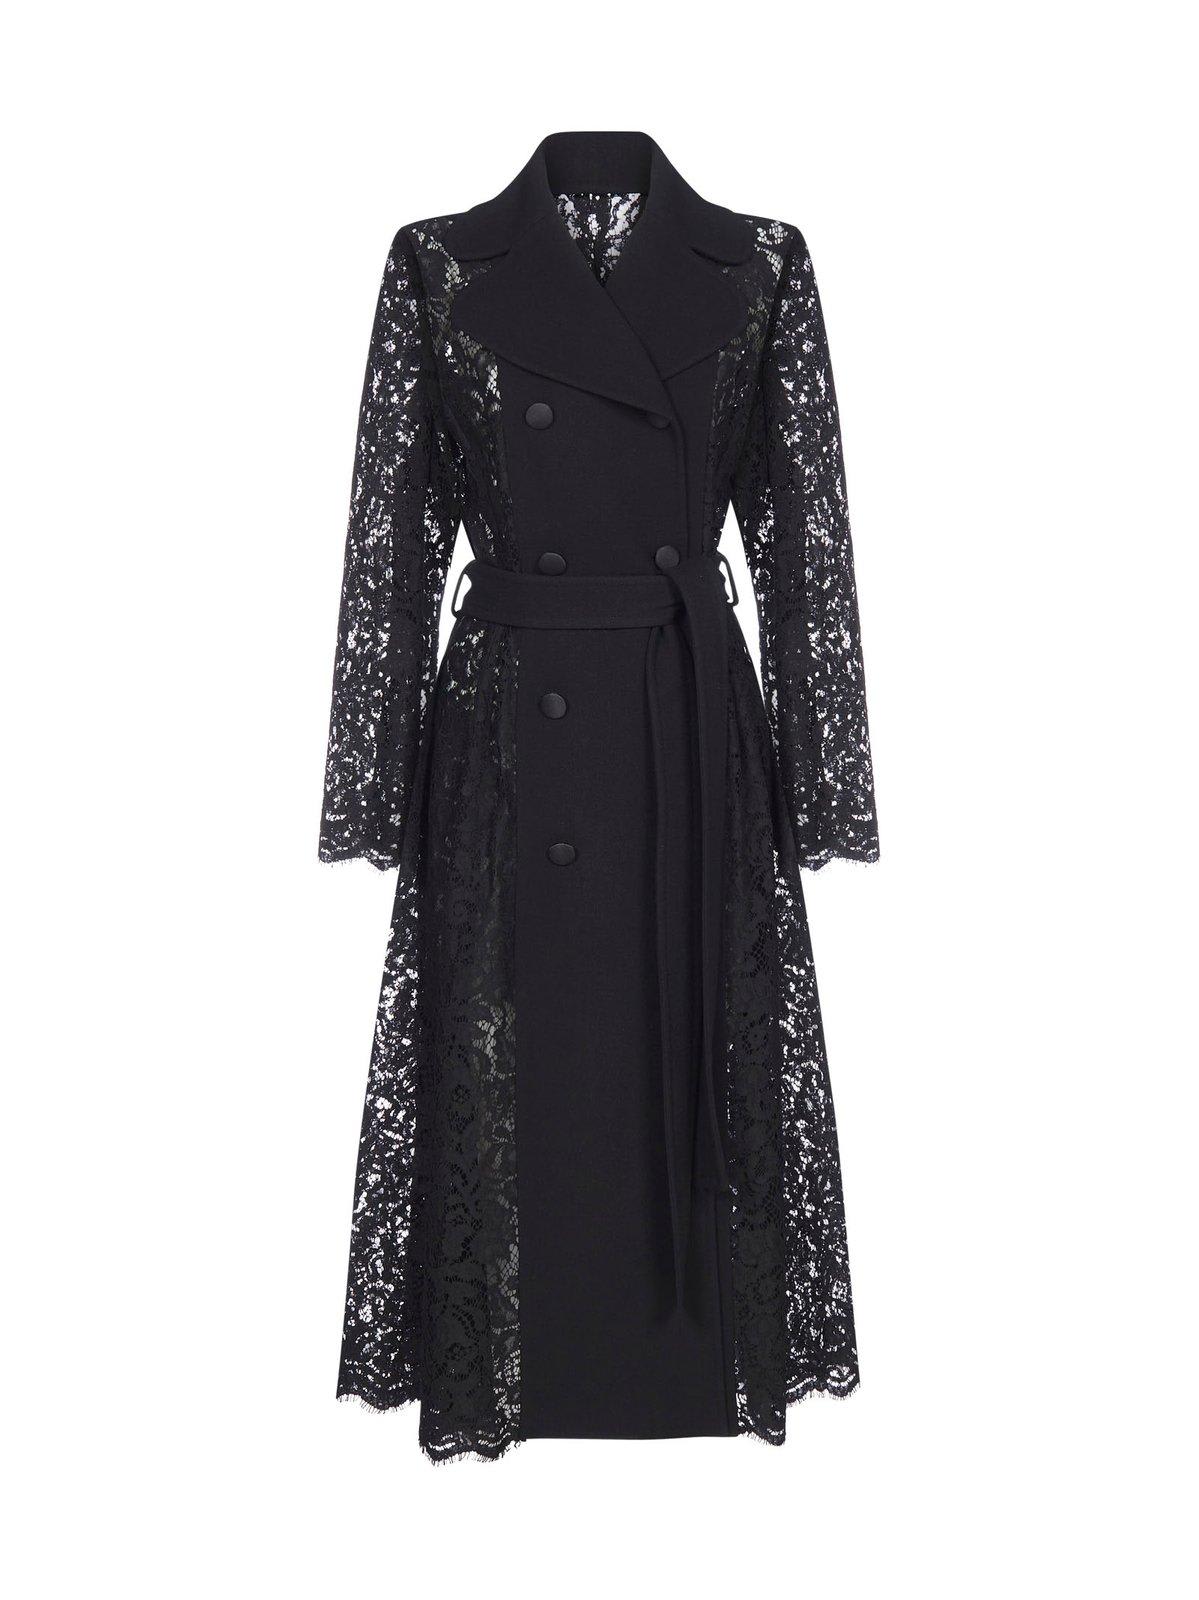 DOLCE & GABBANA BELTED DOUBLE BREASTED LACE COAT